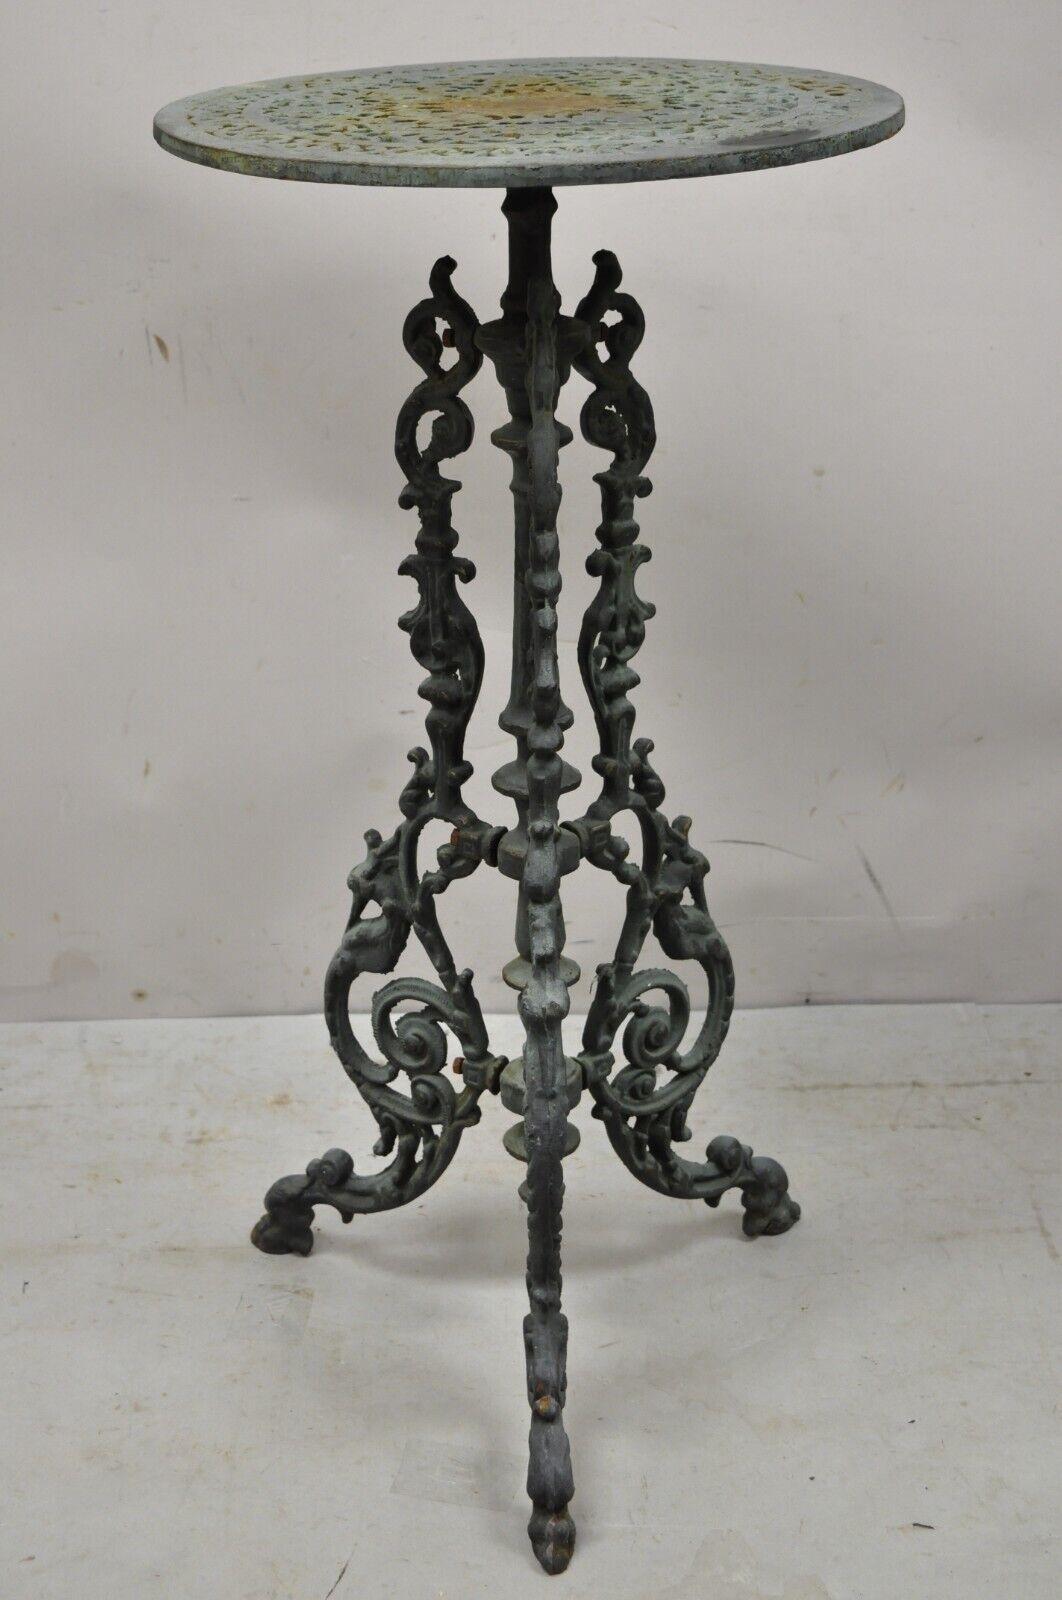 Antique Victorian cast iron green ornate plant stand tripod pedestal table. Item features heavy cast iron construction, ornate tripod pedestal base, pierced top, very nice antique item. Circa early 1900s. Measurements: 30